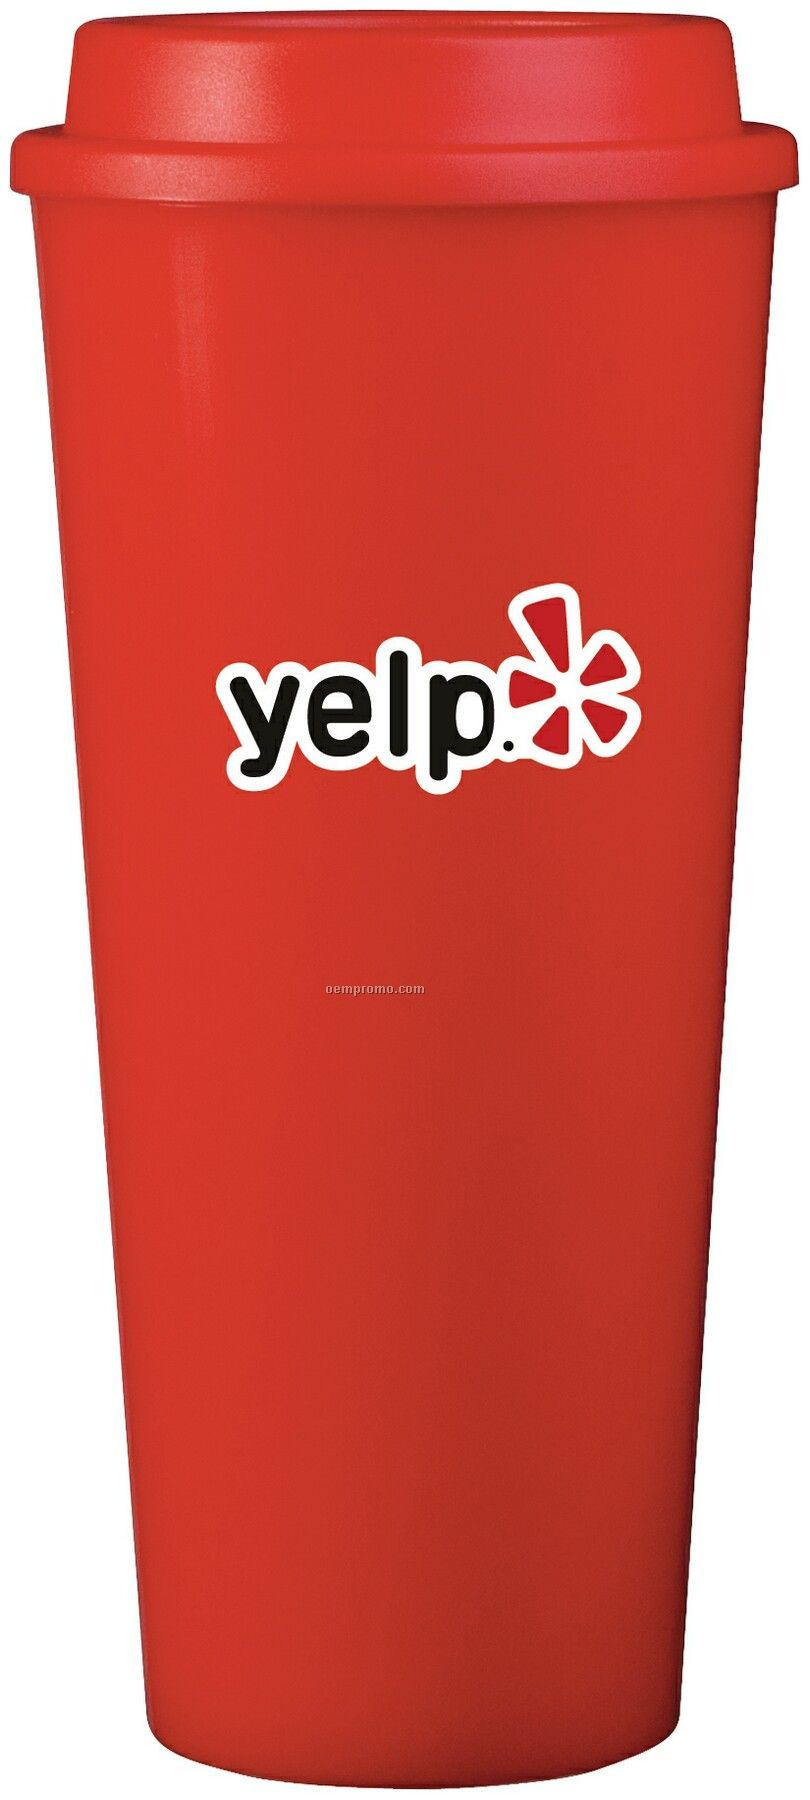 20 Oz. Red Plastic Cup2go Cup